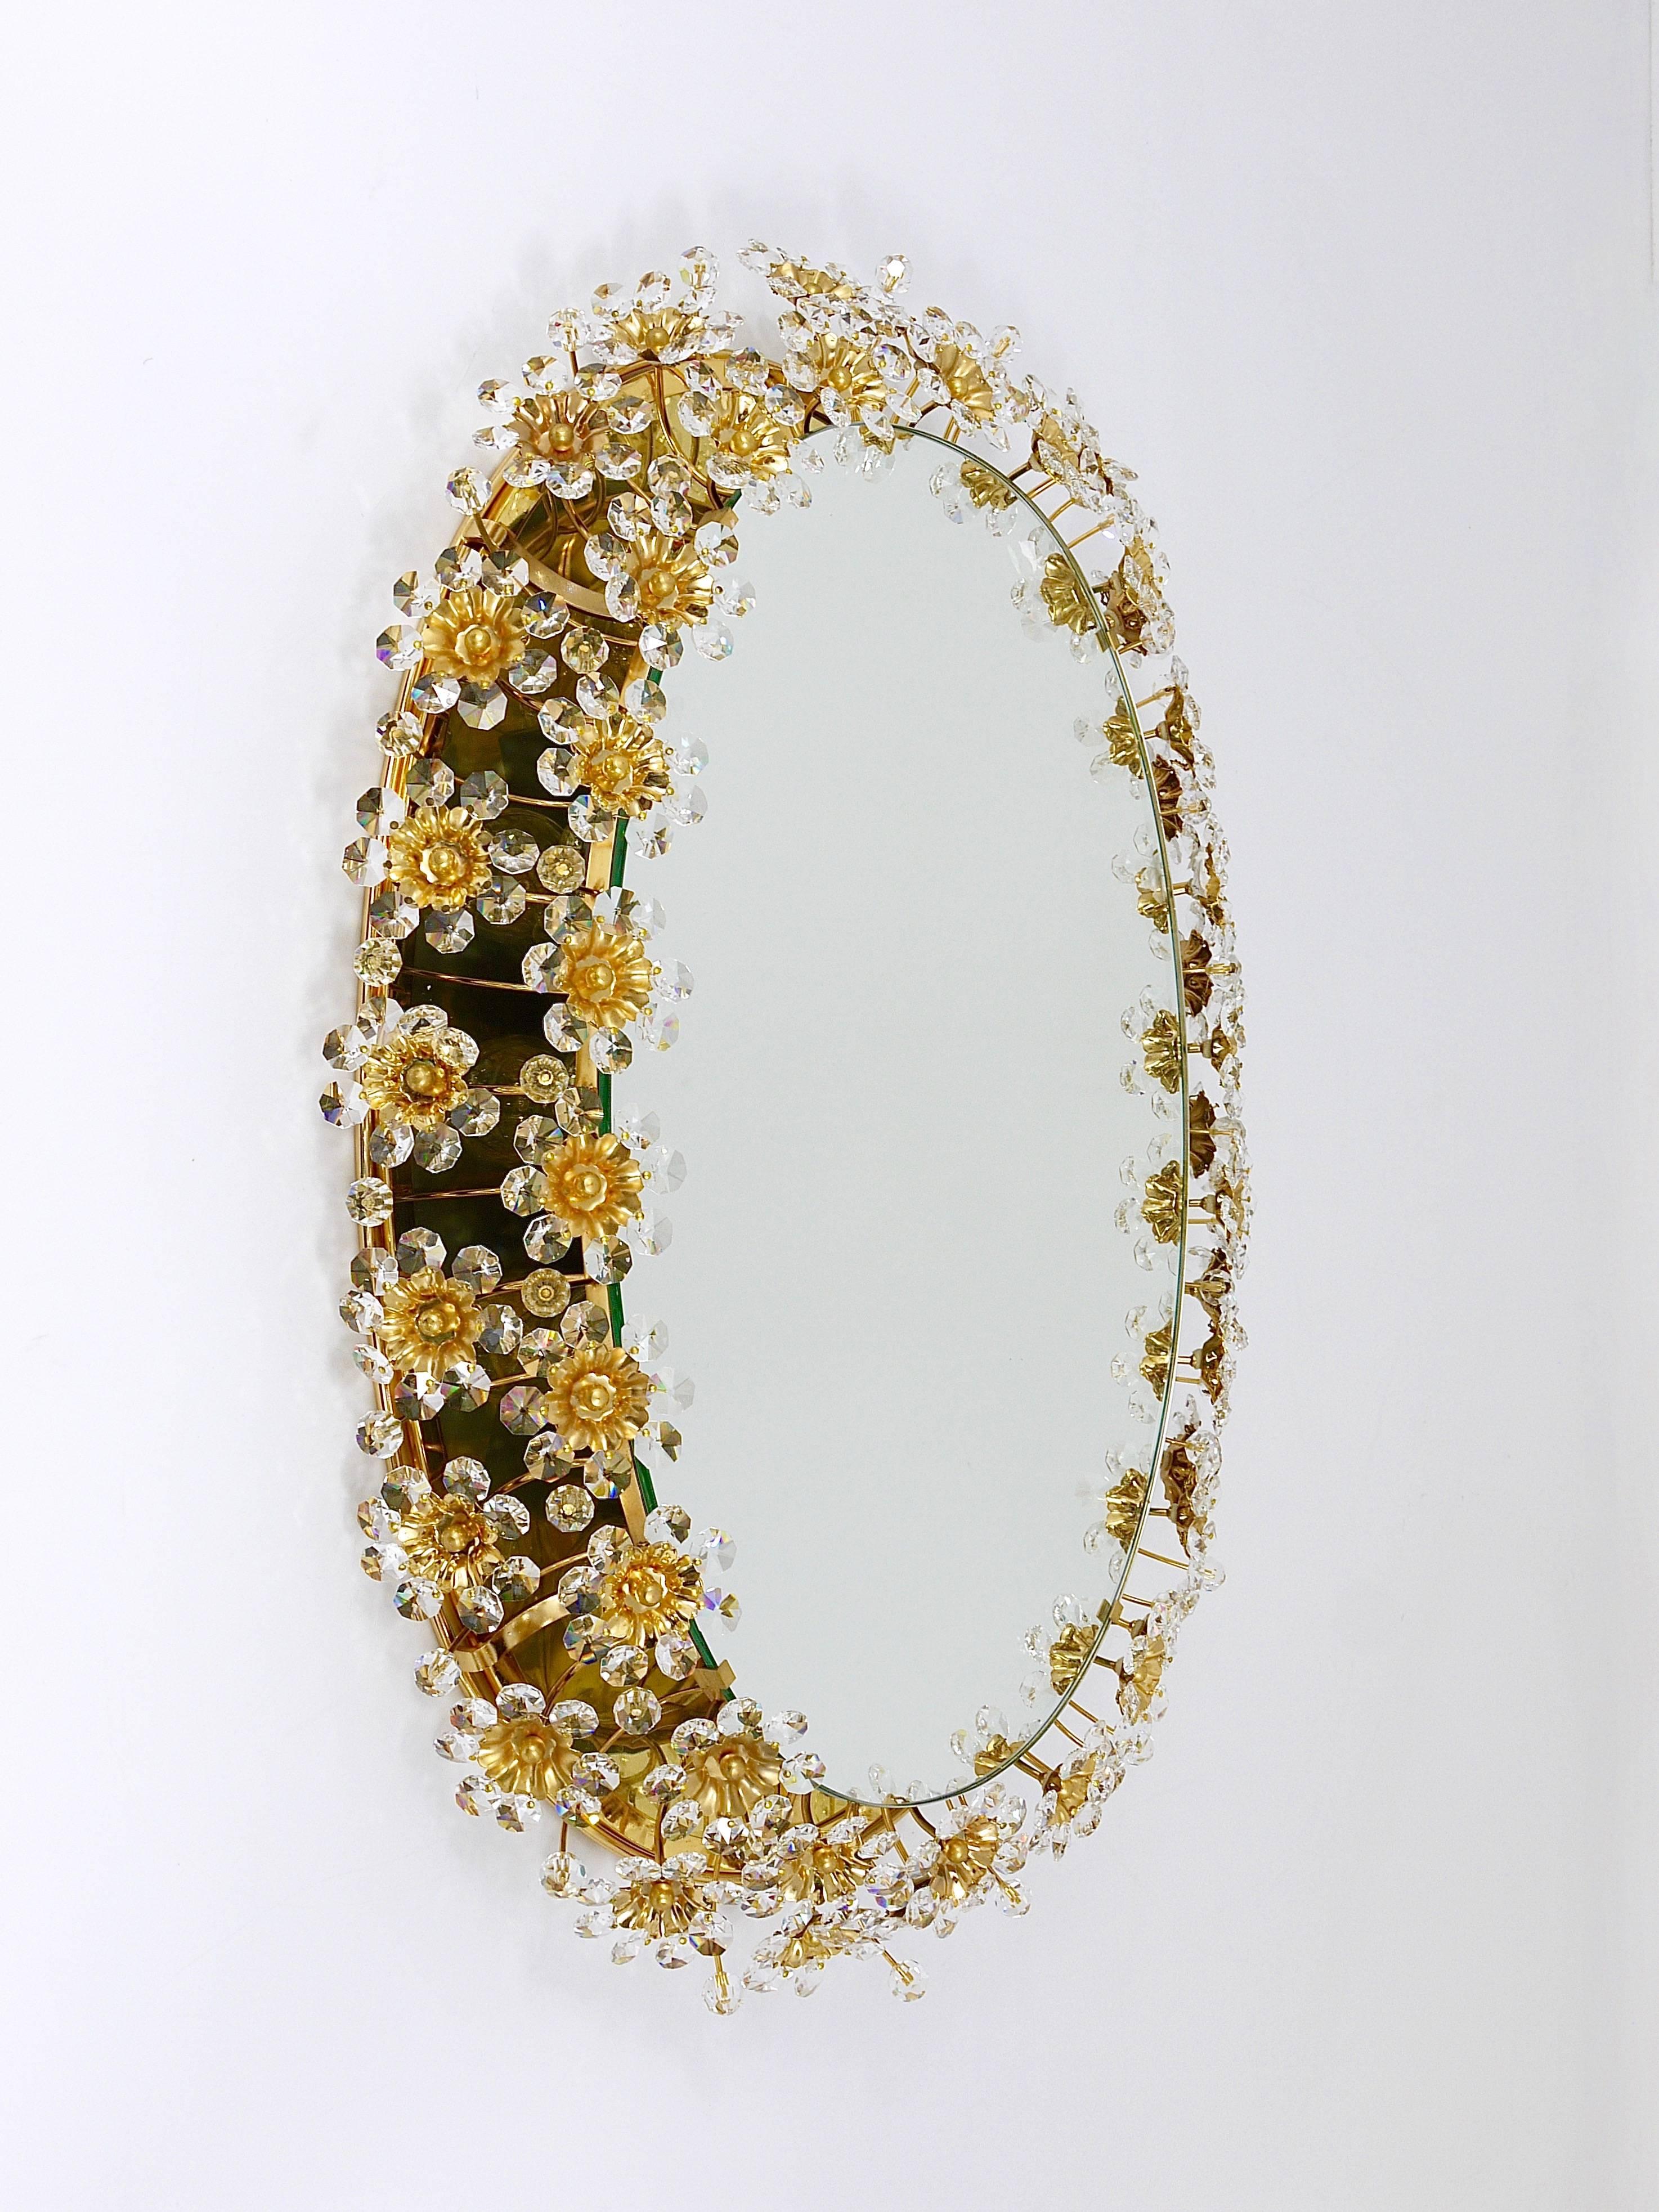 Palwa Backlit Flower Wall Mirror, Gilt Brass and Crystals, Germany, 1970 (Hollywood Regency)